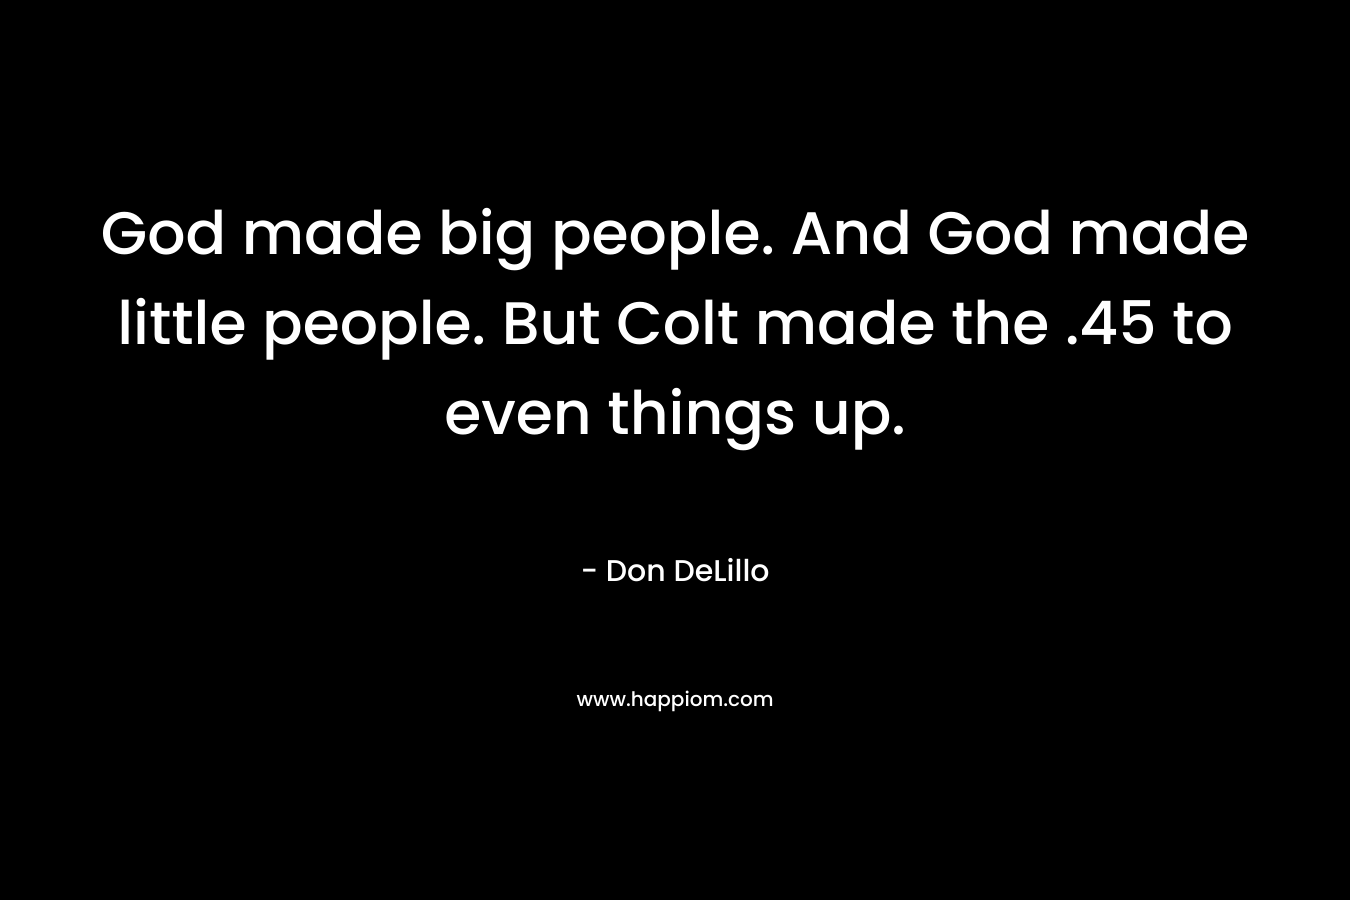 God made big people. And God made little people. But Colt made the .45 to even things up.